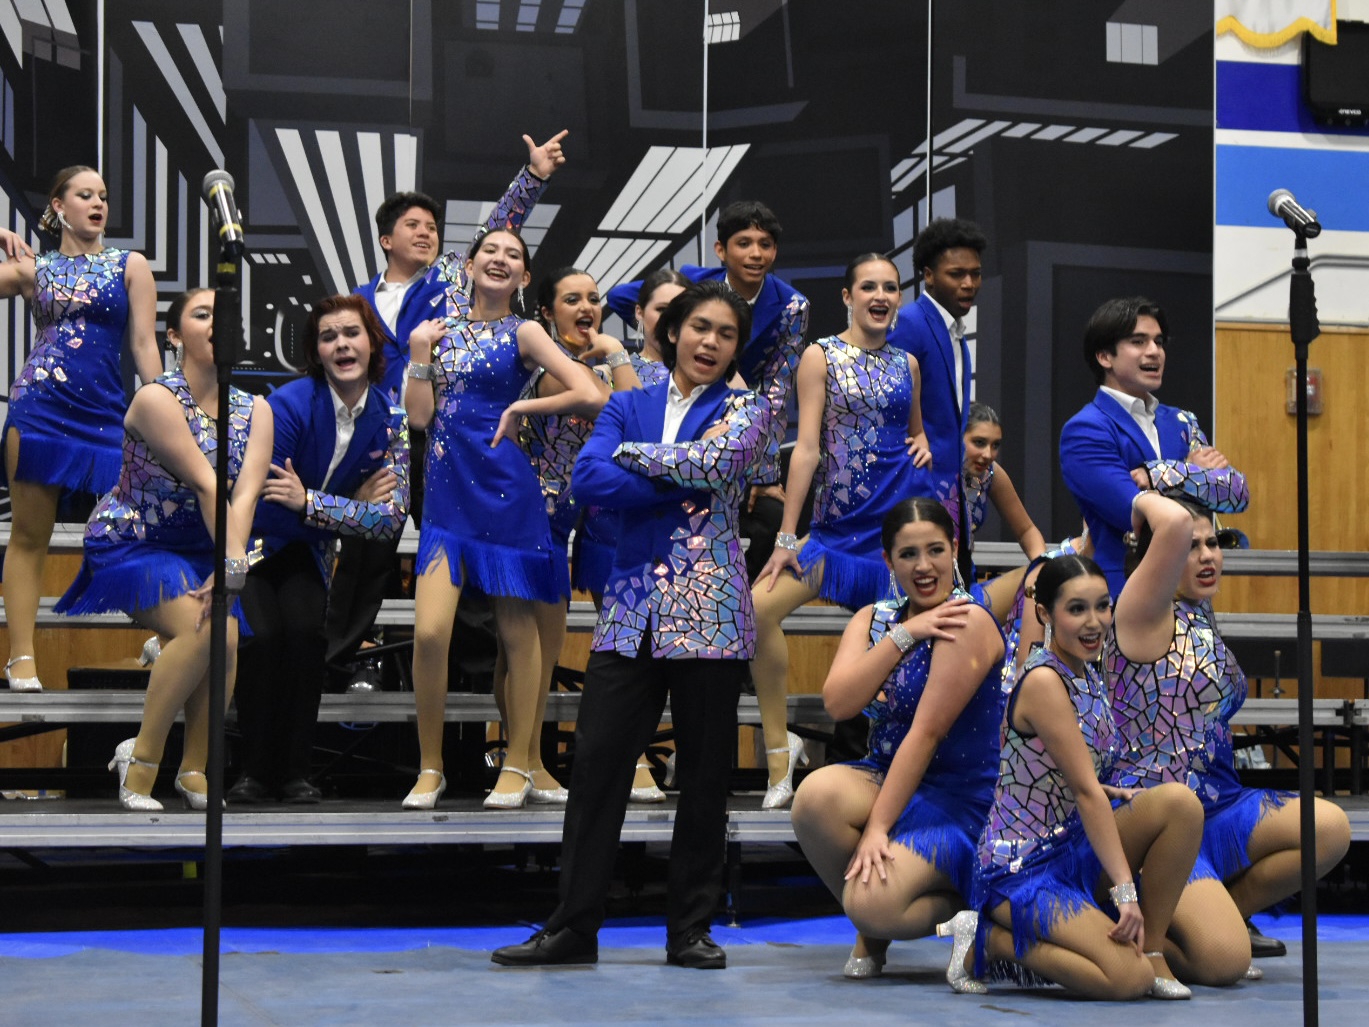 On Feb. 3, BVH Music Machine performs their 2024 festival set Set Me Free for the first time at the VMD show choir debut in the BVH gymnasium. Music Machine will use this set to compete at various show choir competitions during the spring.